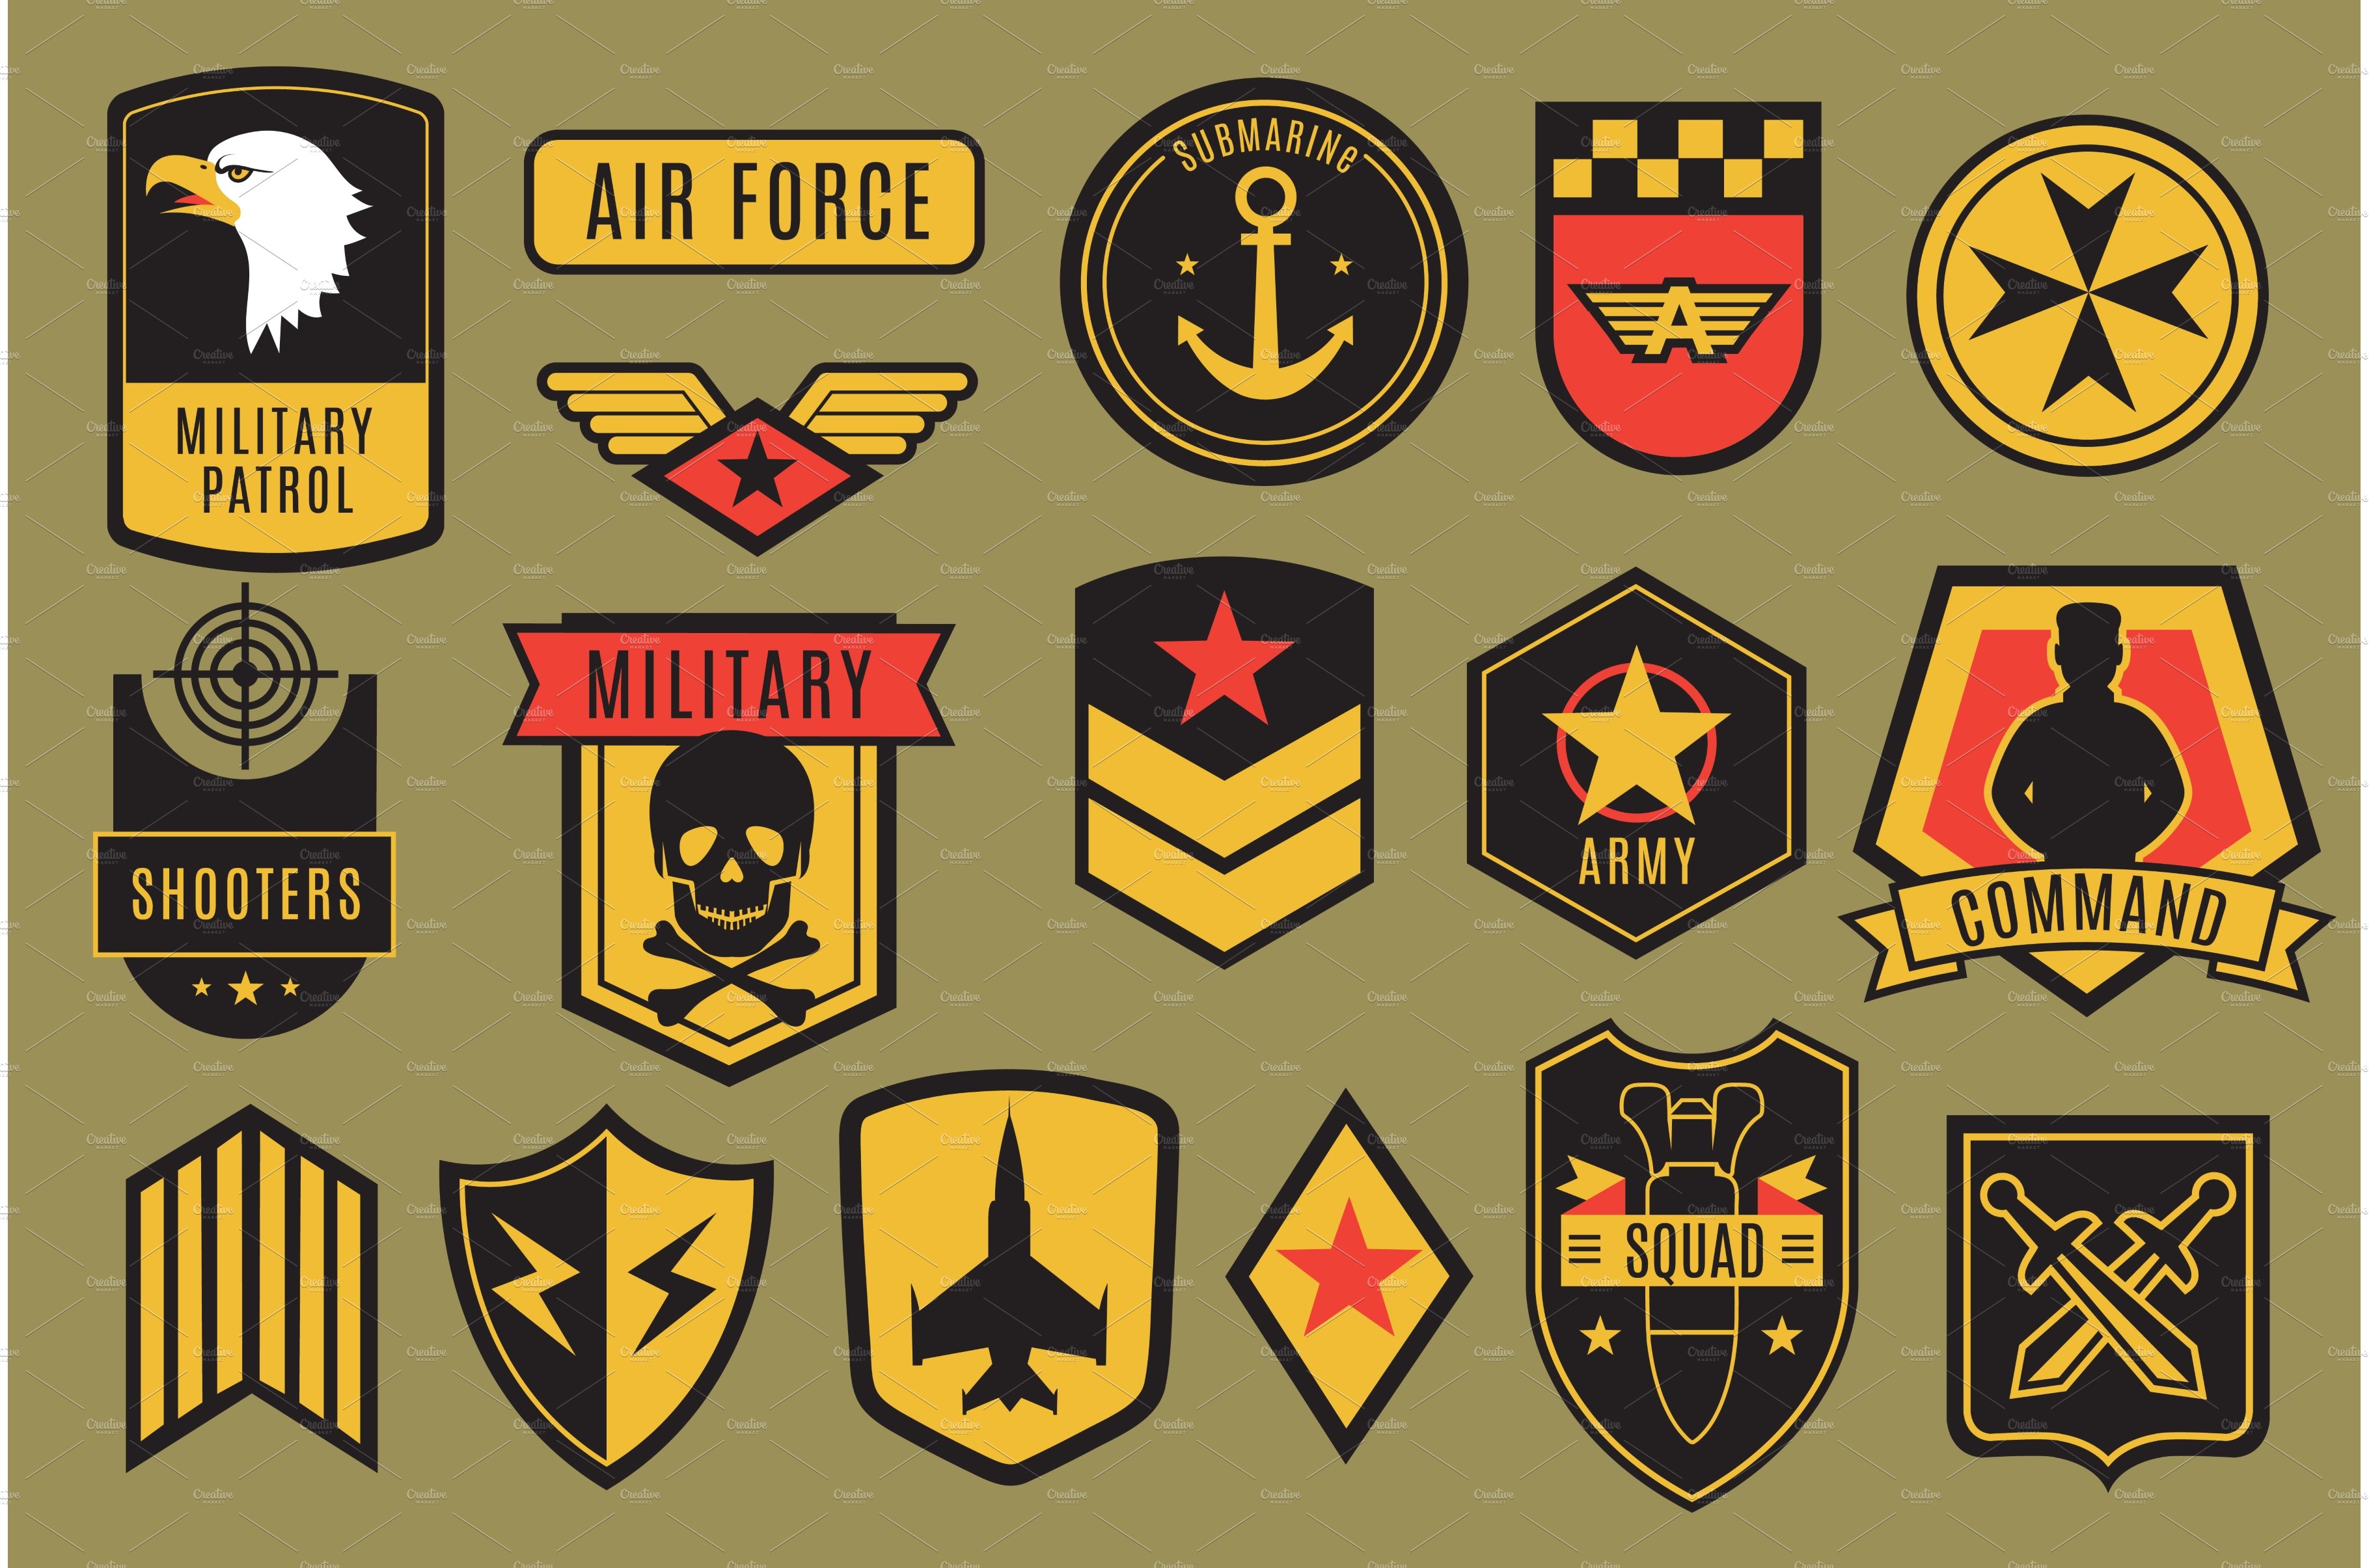 The U.S. Military: Patches Through the Years